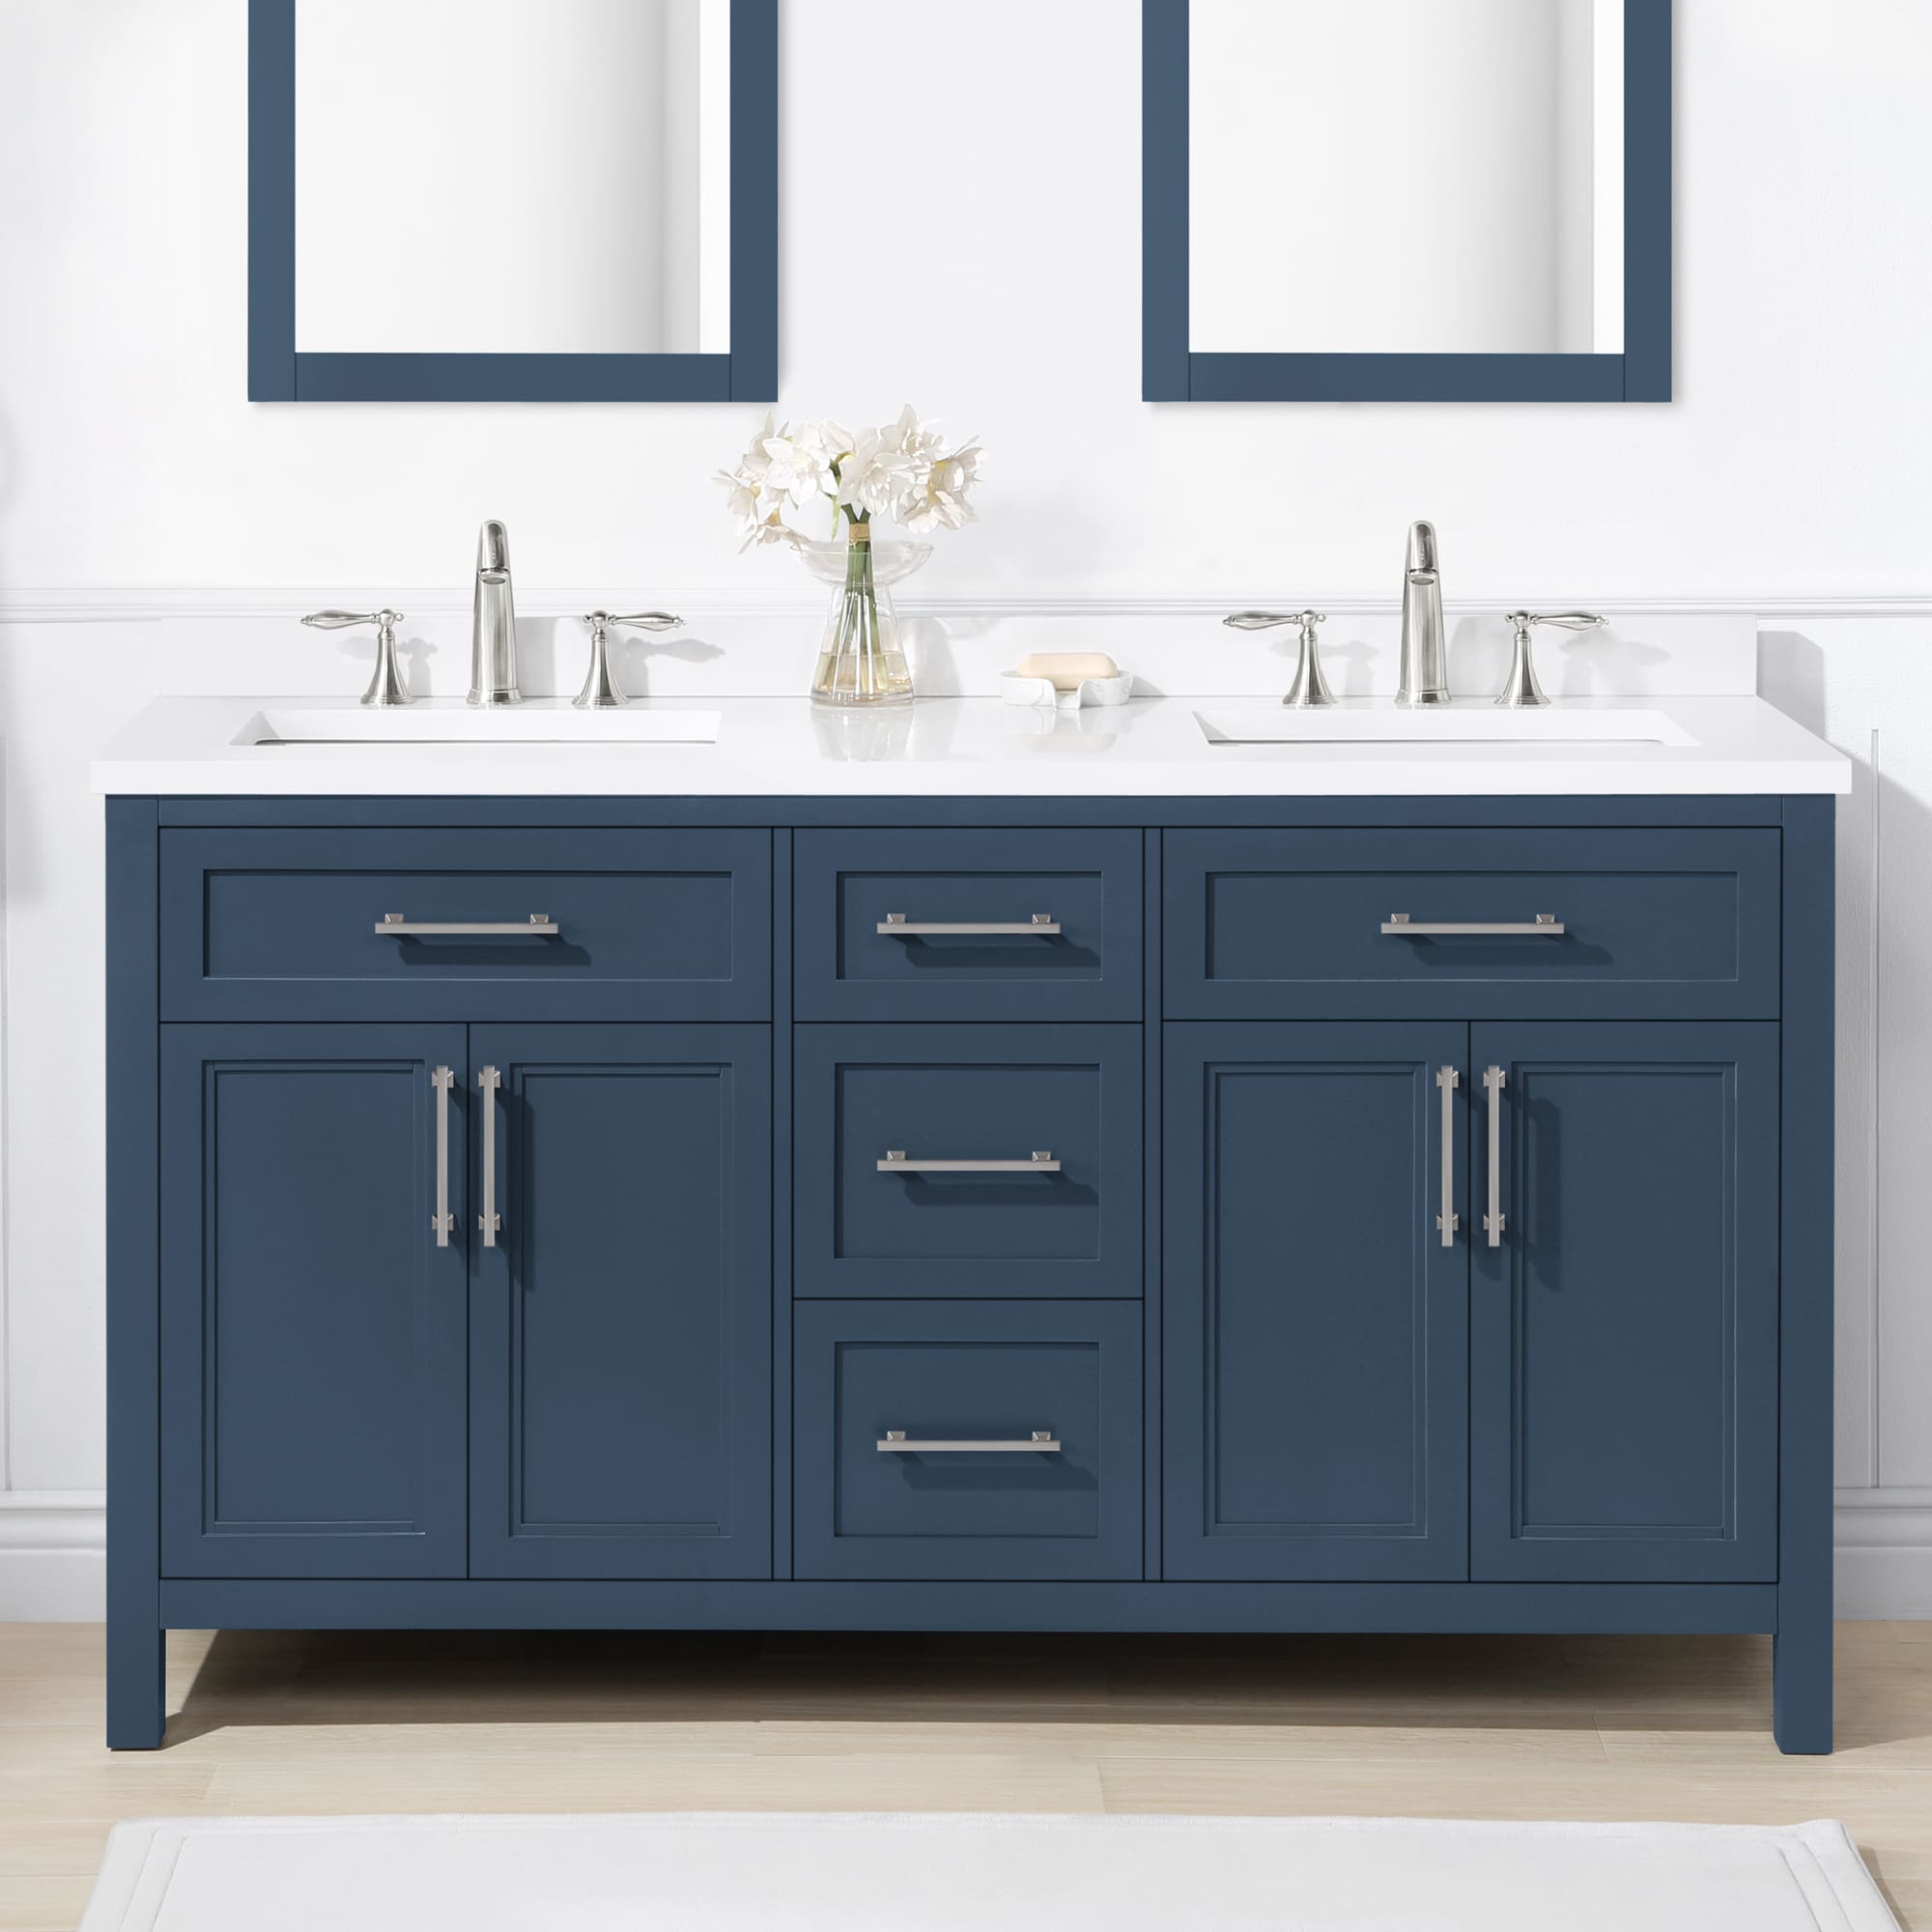 allen + roth Blue Bathroom Vanities with Tops at Lowes.com